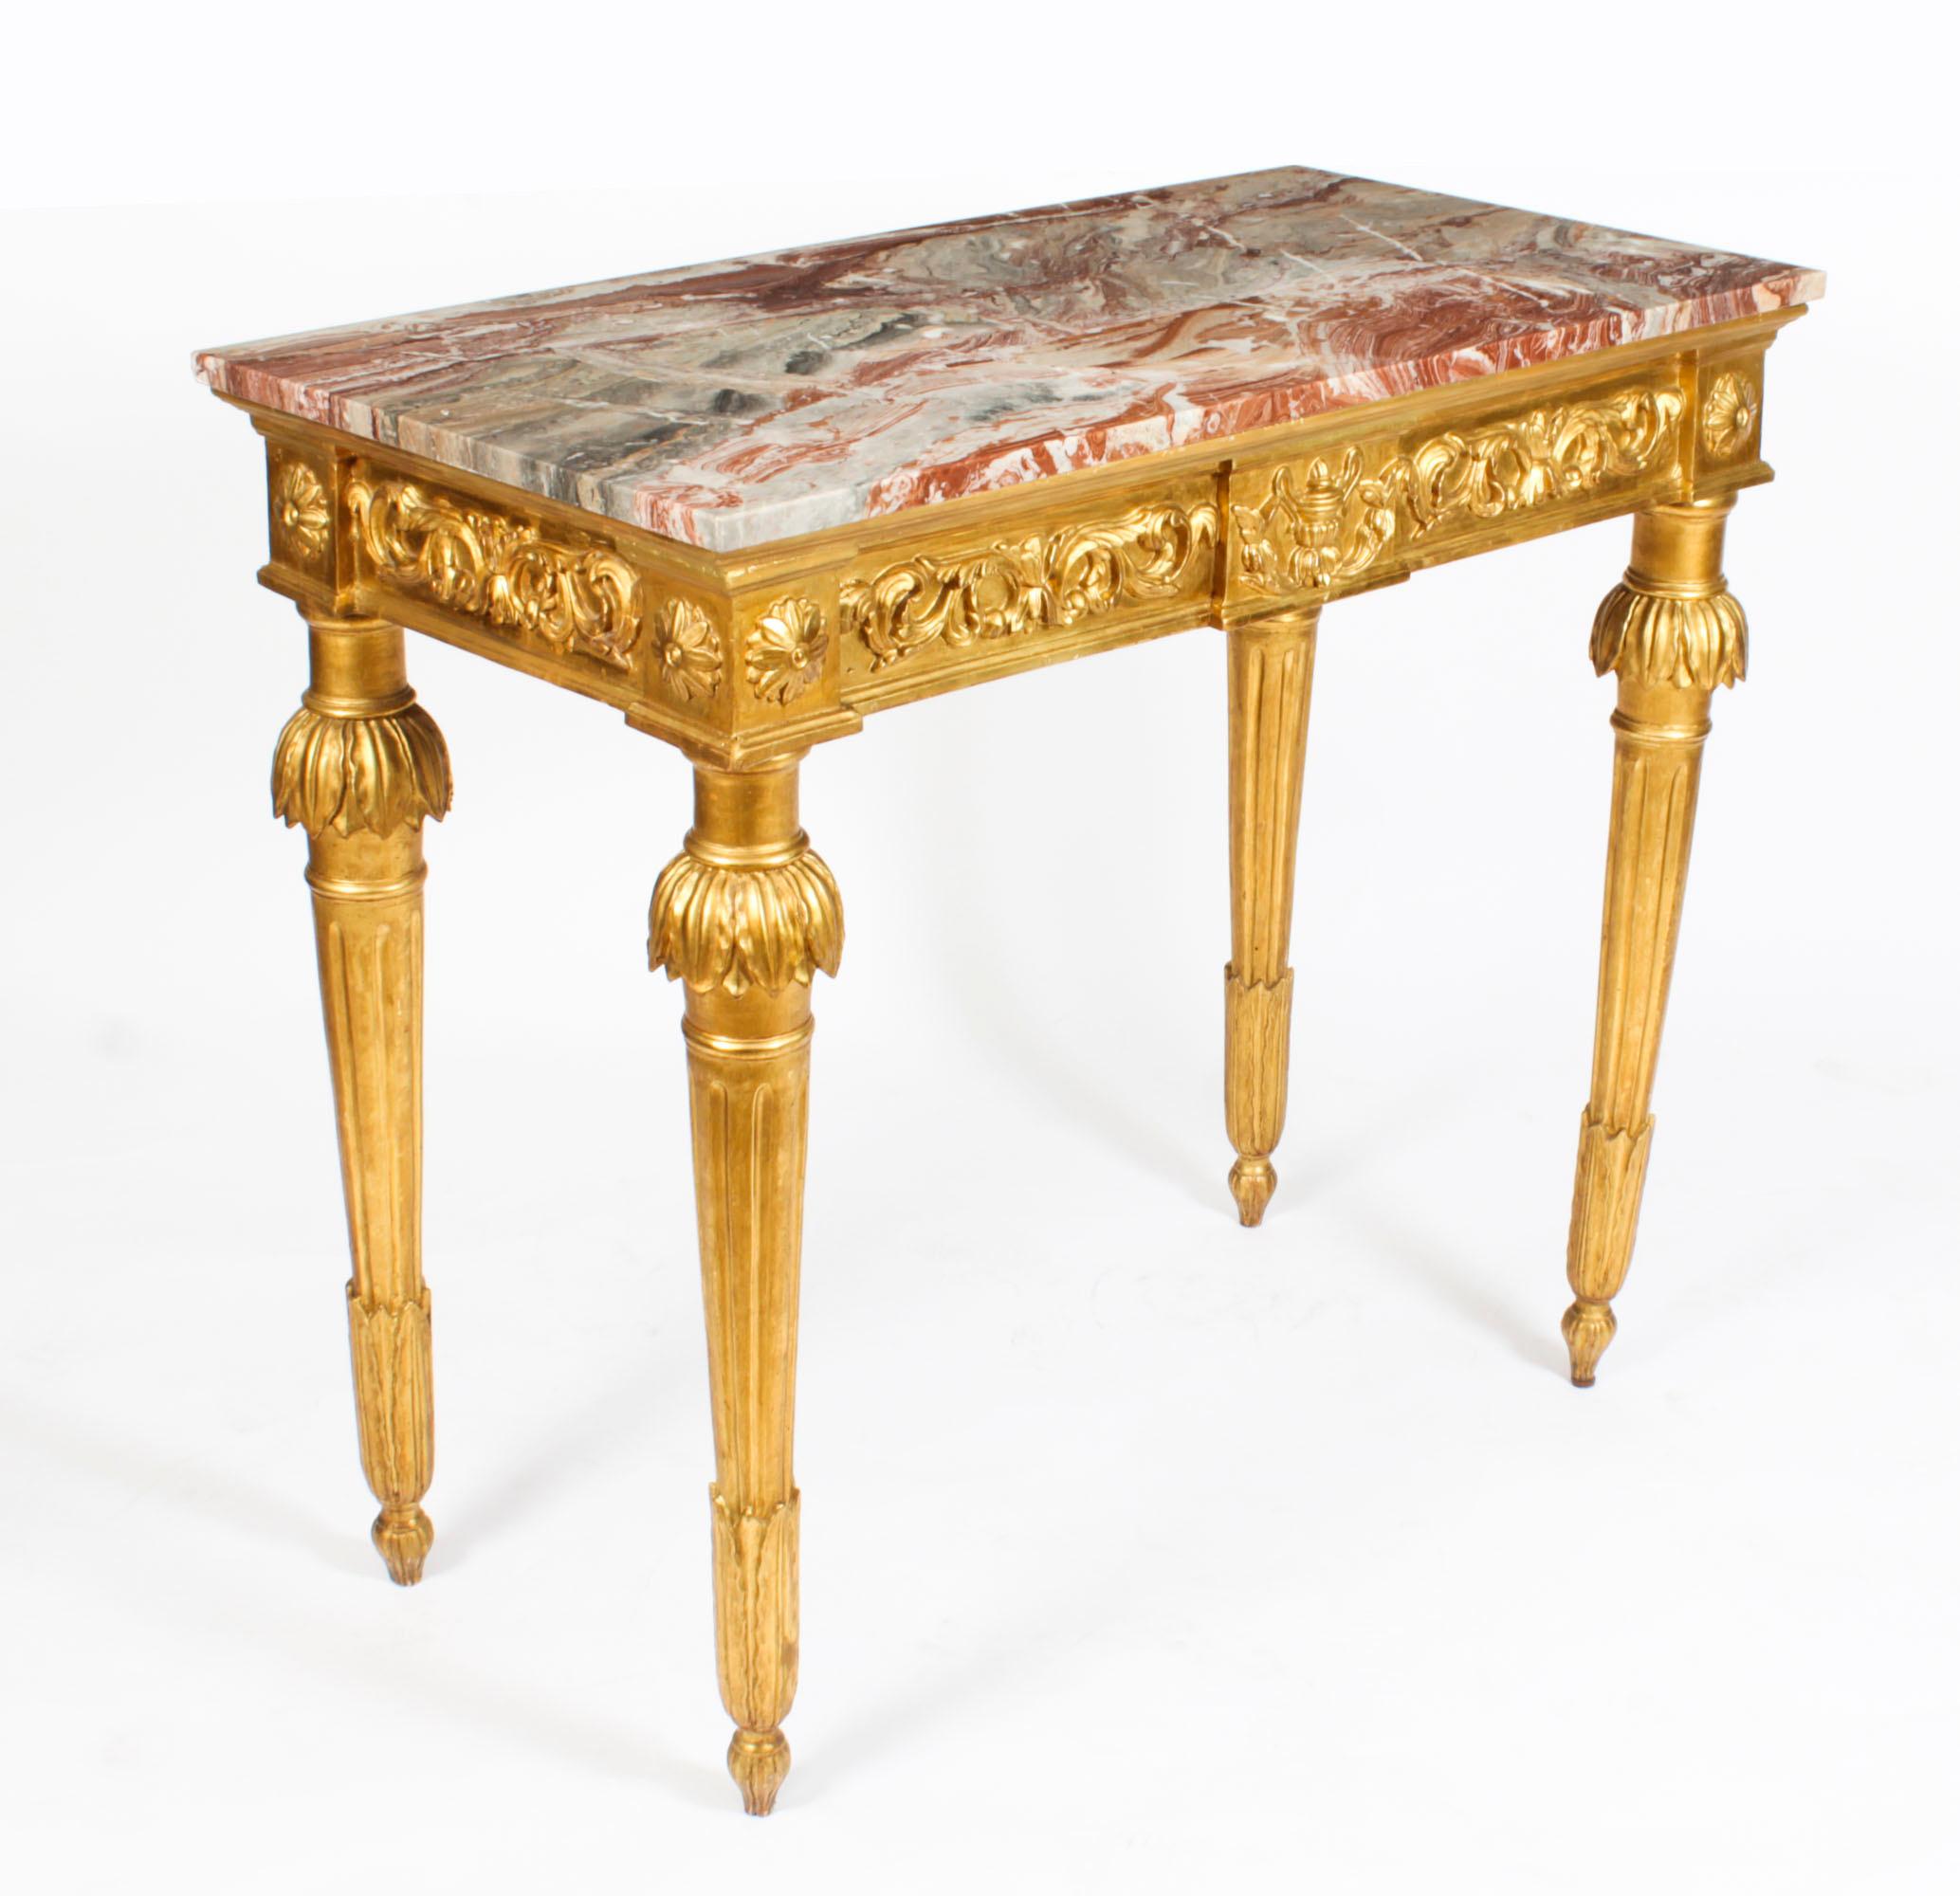 Antique Louis XV Revival Carved Giltwood Console Pier Table, 19th Century For Sale 12